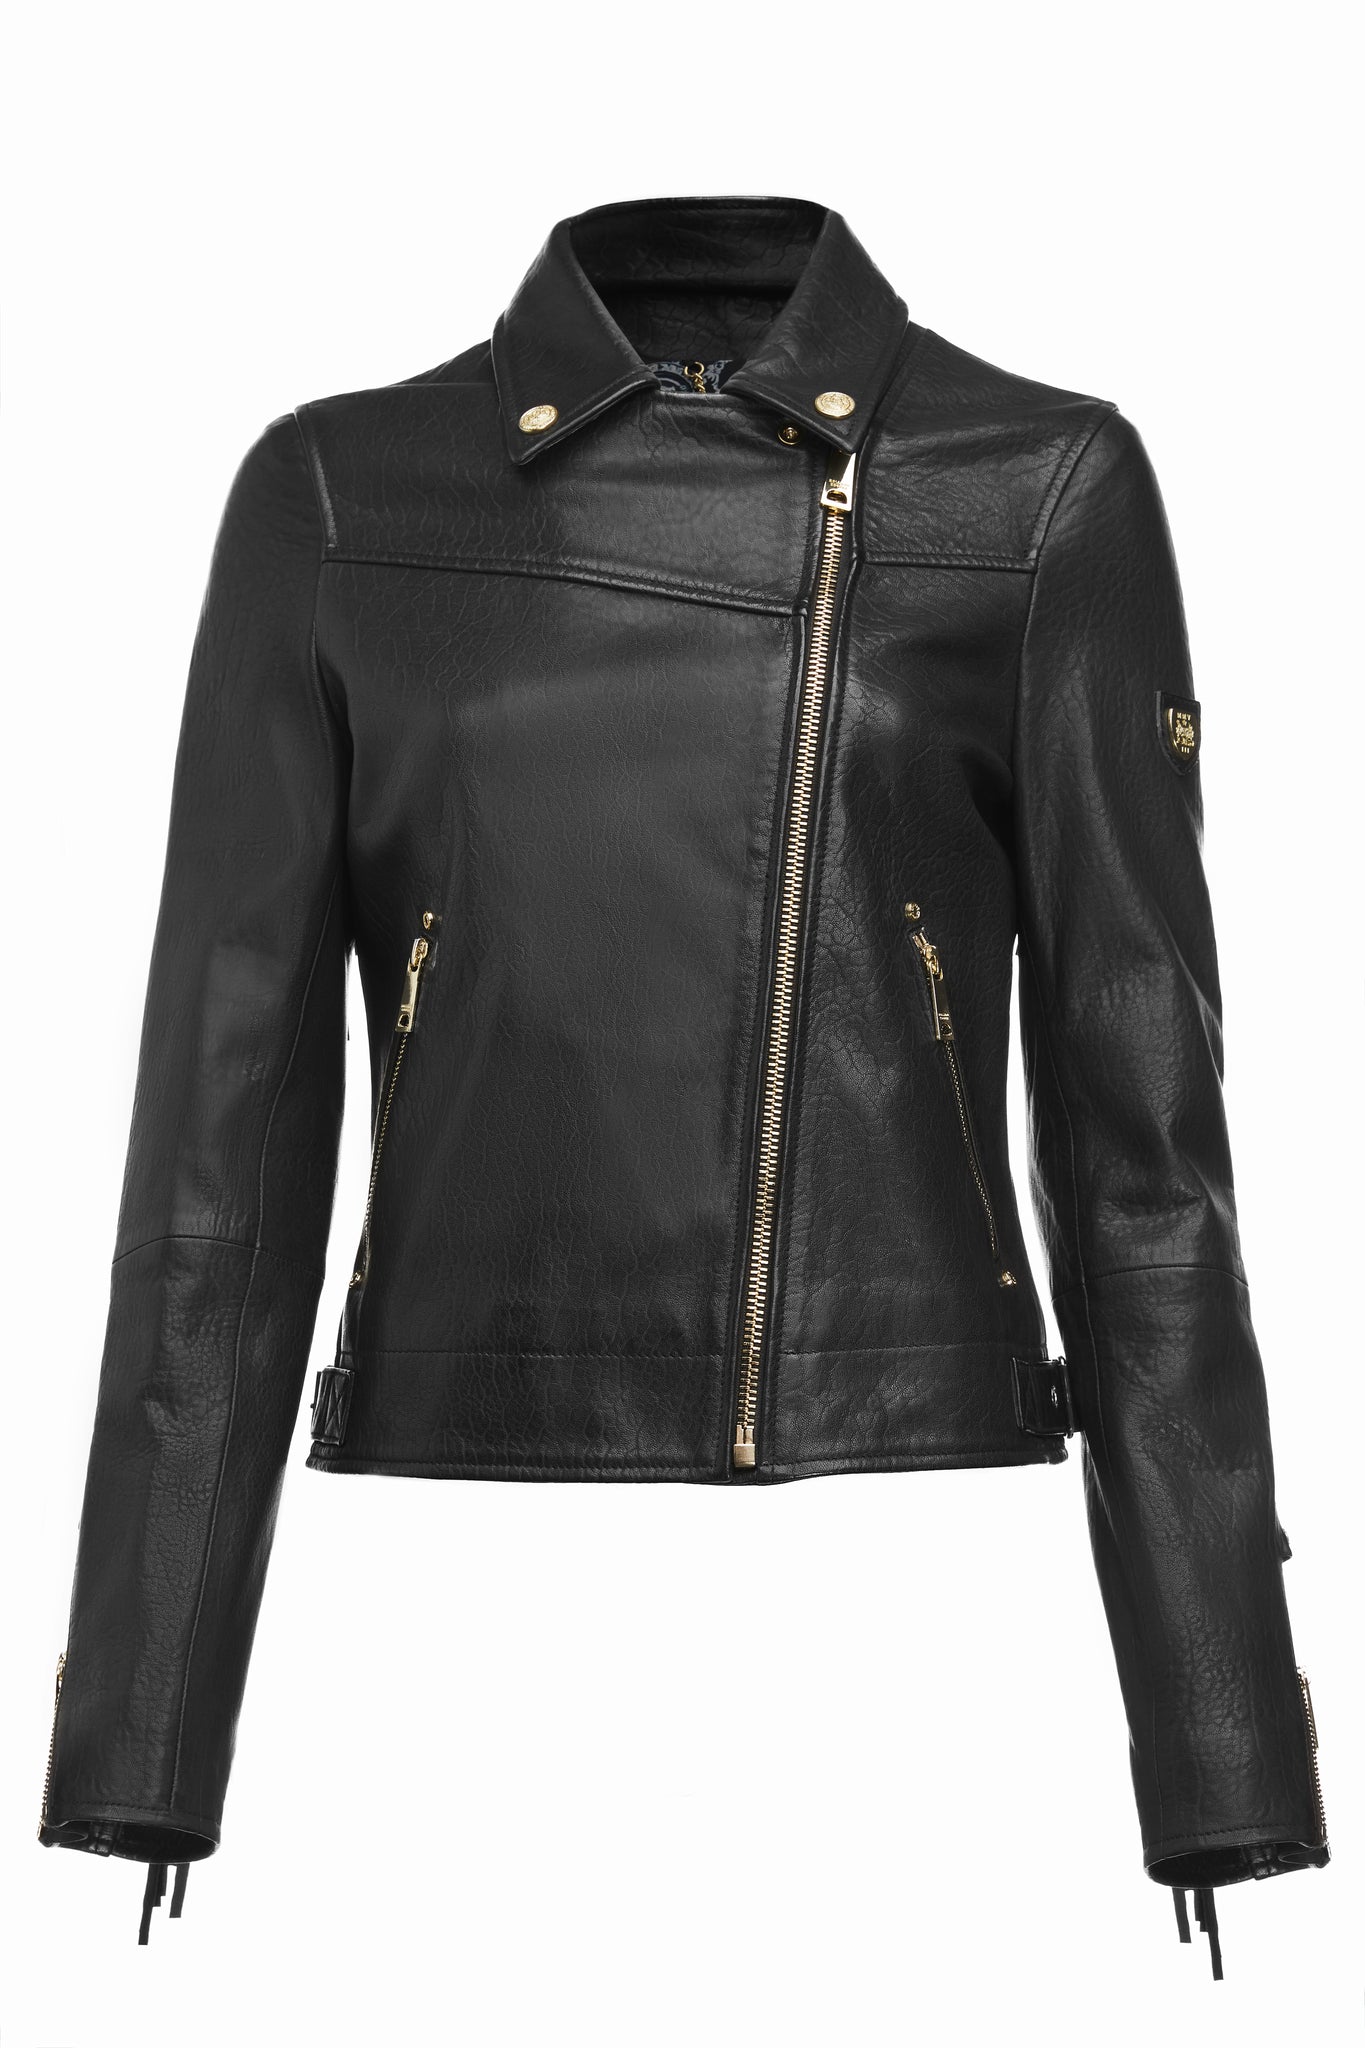 front of womens leather biker jacket in black with fringing along the back and sleeves detailed with golf zips and small shield badge on arm fully zipped 